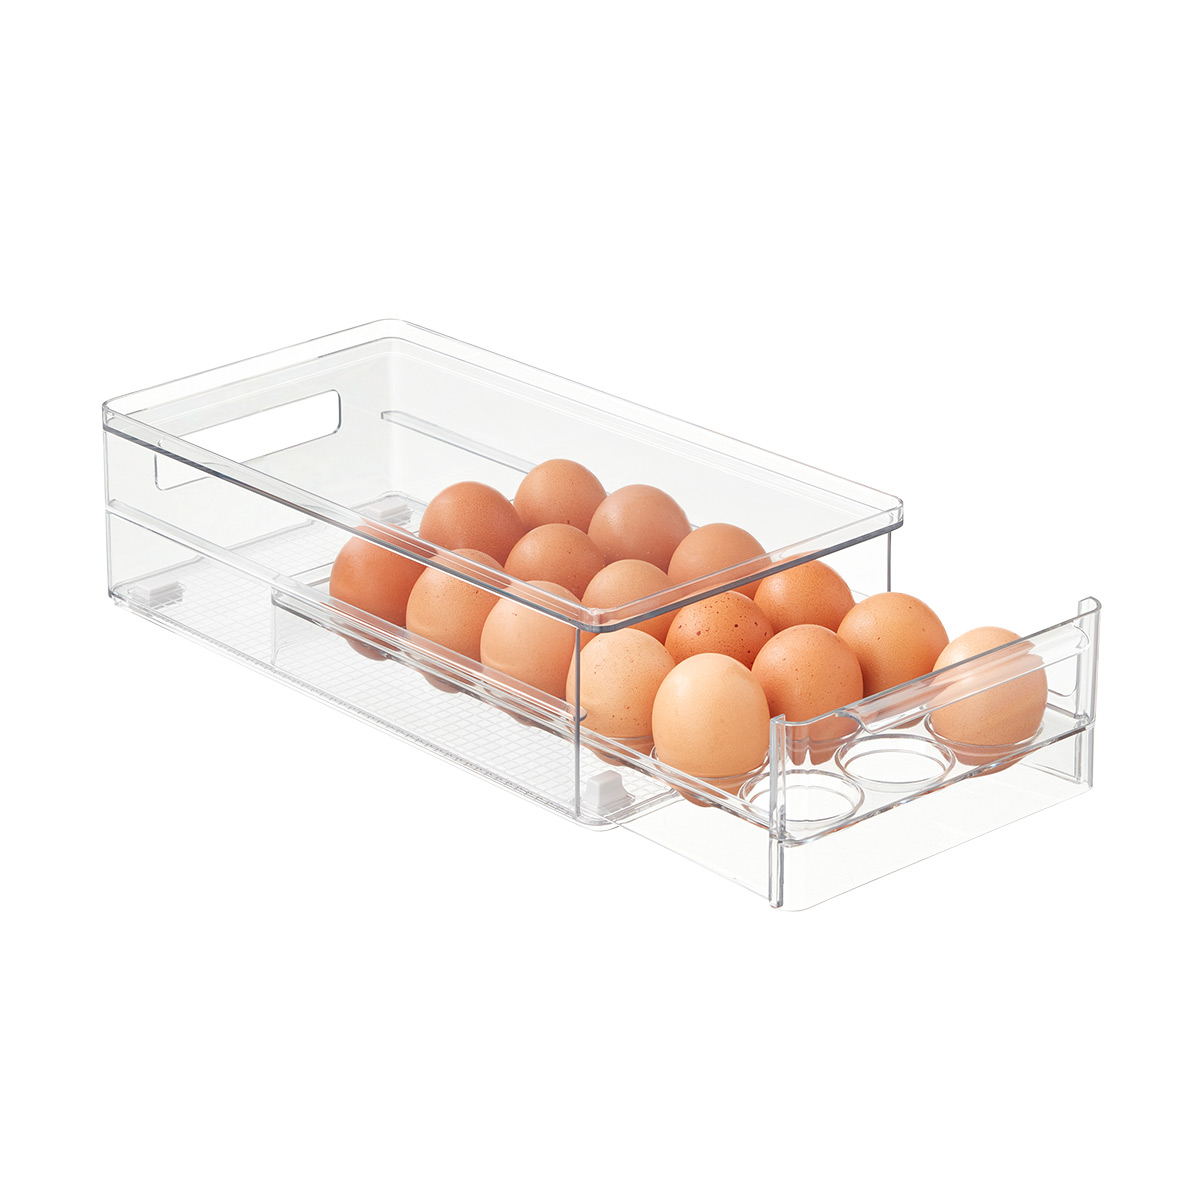 https://www.containerstore.com/catalogimages/518097/10090583-everything-organizer-collec.jpg